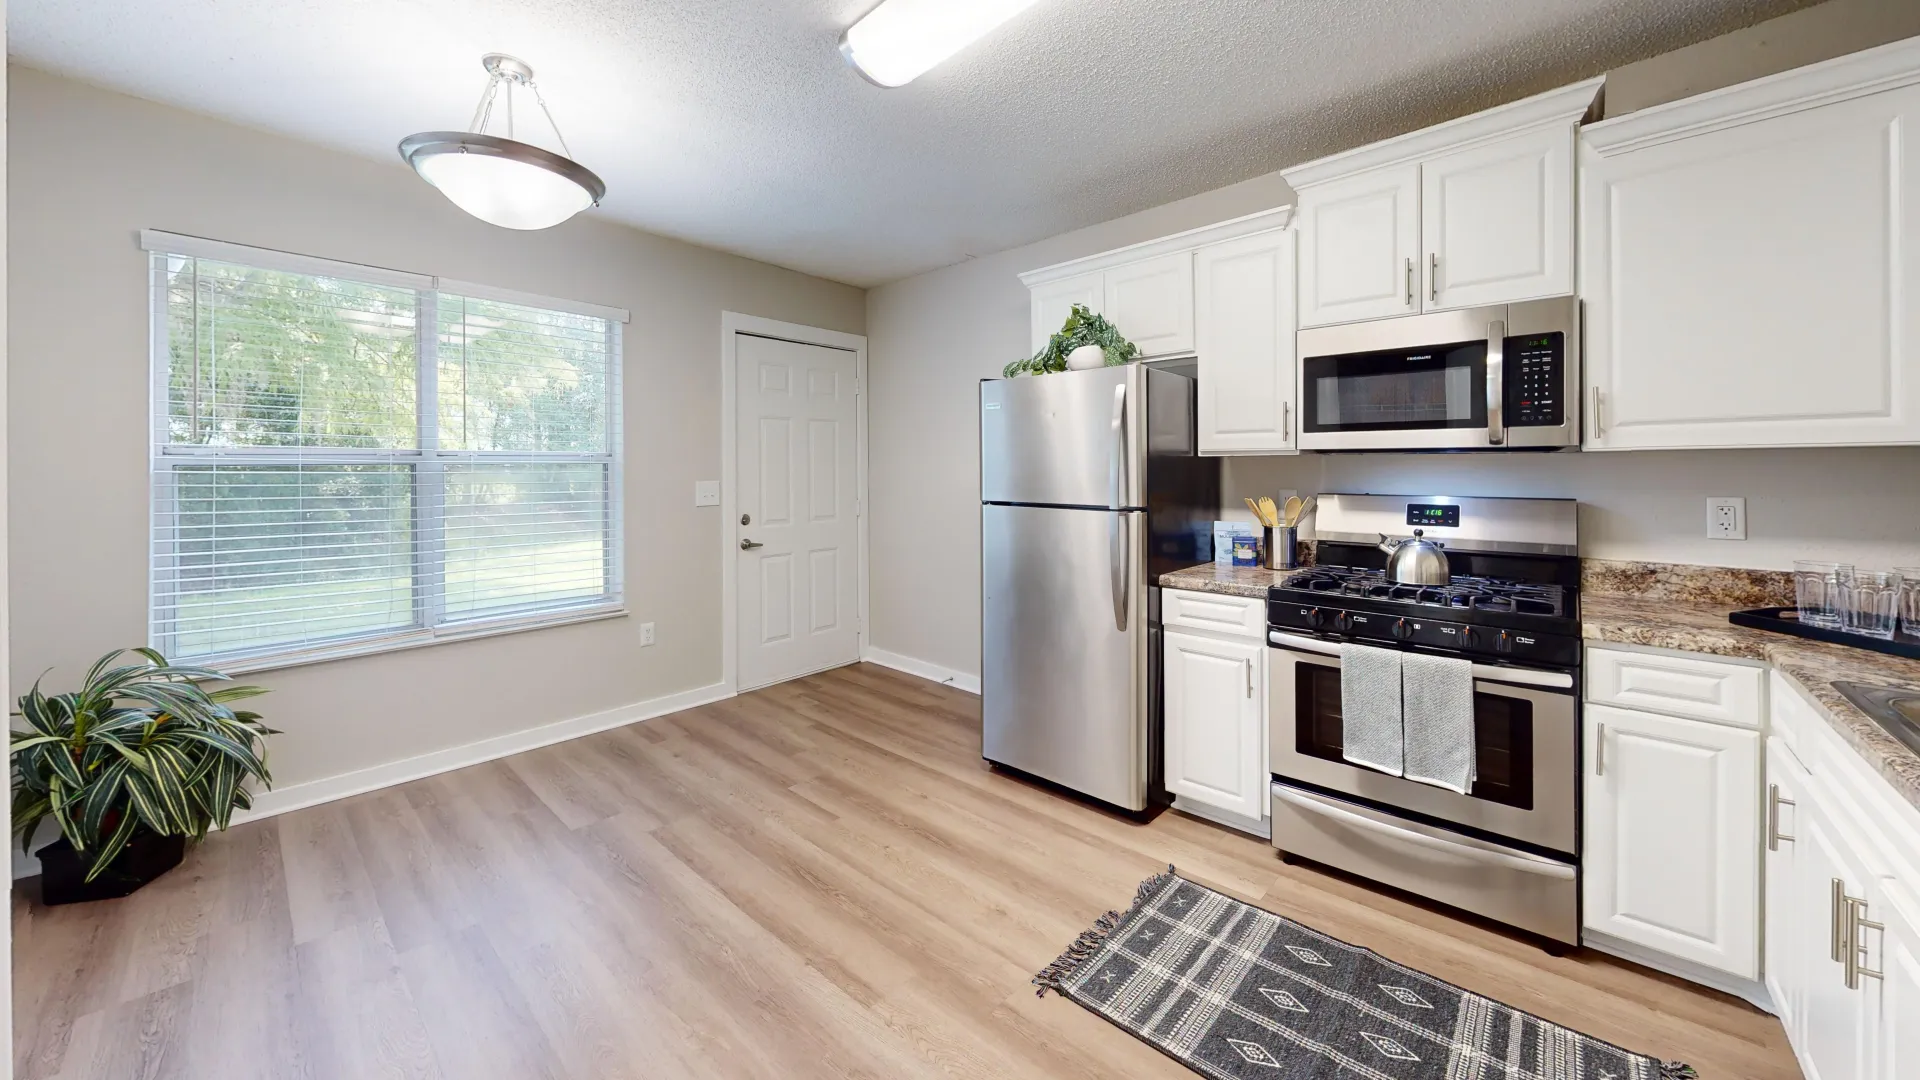 An extra spacious kitchen adorned with a huge double-wide window, gleaming stainless-steel appliances, and additional space for a table with a dedicated lighting fixture.